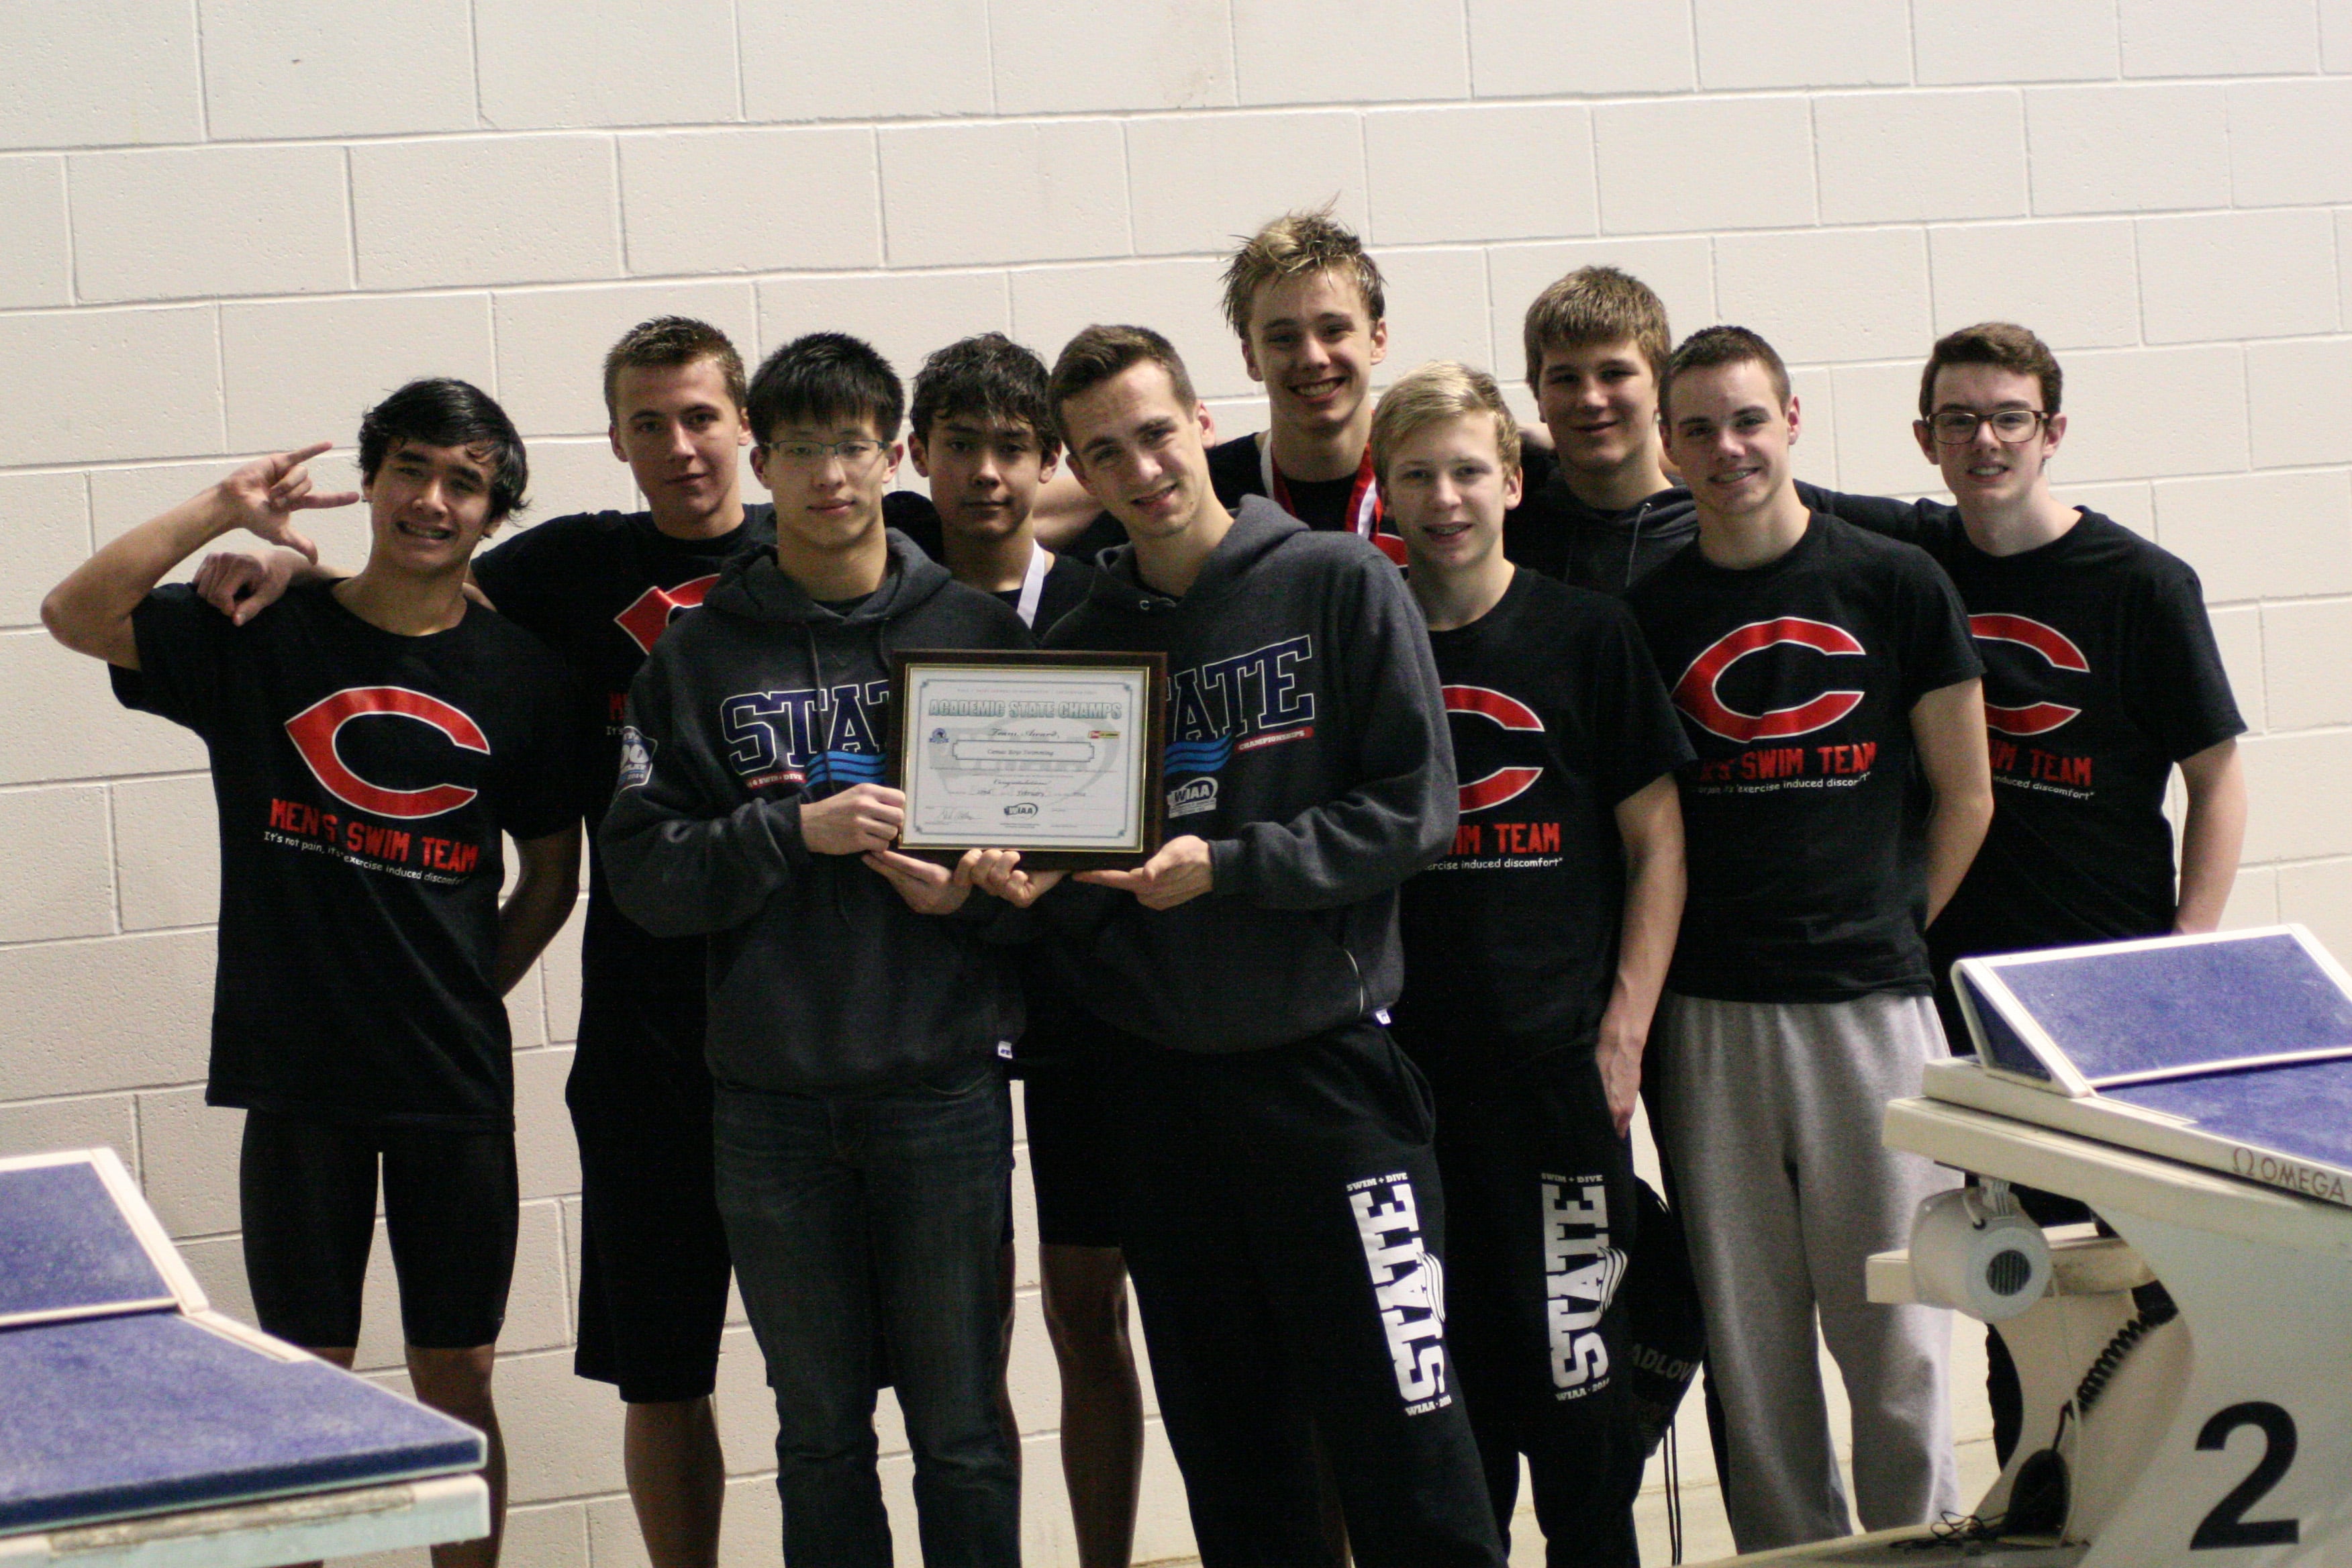 The Camas High School boys swimming team became the 4A academic state champions for the second year in a row. Left to right: John Utas, Lucas Ulmer, Xiaguang Yan, Tom Utas, Joey Wunderlich, Kasey Calwell, Colin Kutha, Jeff Fadlovich, Luke Albert and Nick Burton had a combined GPA of 3.69.